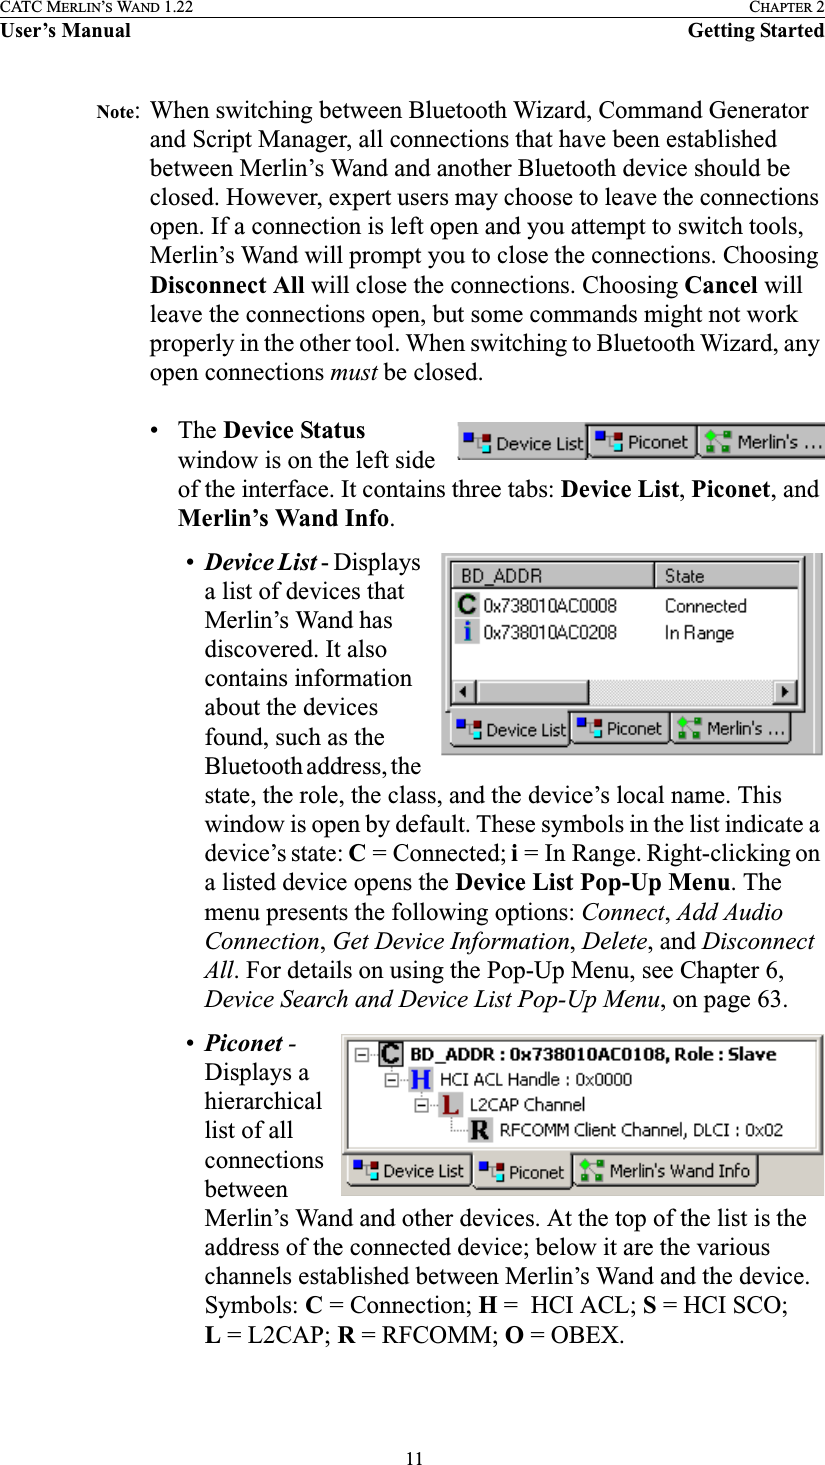  11CATC MERLIN’S WAND 1.22 CHAPTER 2User’s Manual Getting StartedNote: When switching between Bluetooth Wizard, Command Generator and Script Manager, all connections that have been established between Merlin’s Wand and another Bluetooth device should be closed. However, expert users may choose to leave the connections open. If a connection is left open and you attempt to switch tools, Merlin’s Wand will prompt you to close the connections. Choosing Disconnect All will close the connections. Choosing Cancel will leave the connections open, but some commands might not work properly in the other tool. When switching to Bluetooth Wizard, any open connections must be closed.• The Device Status window is on the left side of the interface. It contains three tabs: Device List, Piconet, and Merlin’s Wand Info.•Device List - Displays a list of devices that Merlin’s Wand has discovered. It also contains information about the devices found, such as the Bluetooth address, the state, the role, the class, and the device’s local name. This window is open by default. These symbols in the list indicate a device’s state: C= Connected; i= In Range. Right-clicking on a listed device opens the Device List Pop-Up Menu. The menu presents the following options: Connect, Add Audio Connection, Get Device Information, Delete, and Disconnect All. For details on using the Pop-Up Menu, see Chapter 6, Device Search and Device List Pop-Up Menu, on page 63.•Piconet - Displays a hierarchical list of all connections between Merlin’s Wand and other devices. At the top of the list is the address of the connected device; below it are the various channels established between Merlin’s Wand and the device. Symbols: C= Connection; H= HCIACL; S=HCISCO; L=L2CAP; R= RFCOMM; O=OBEX.